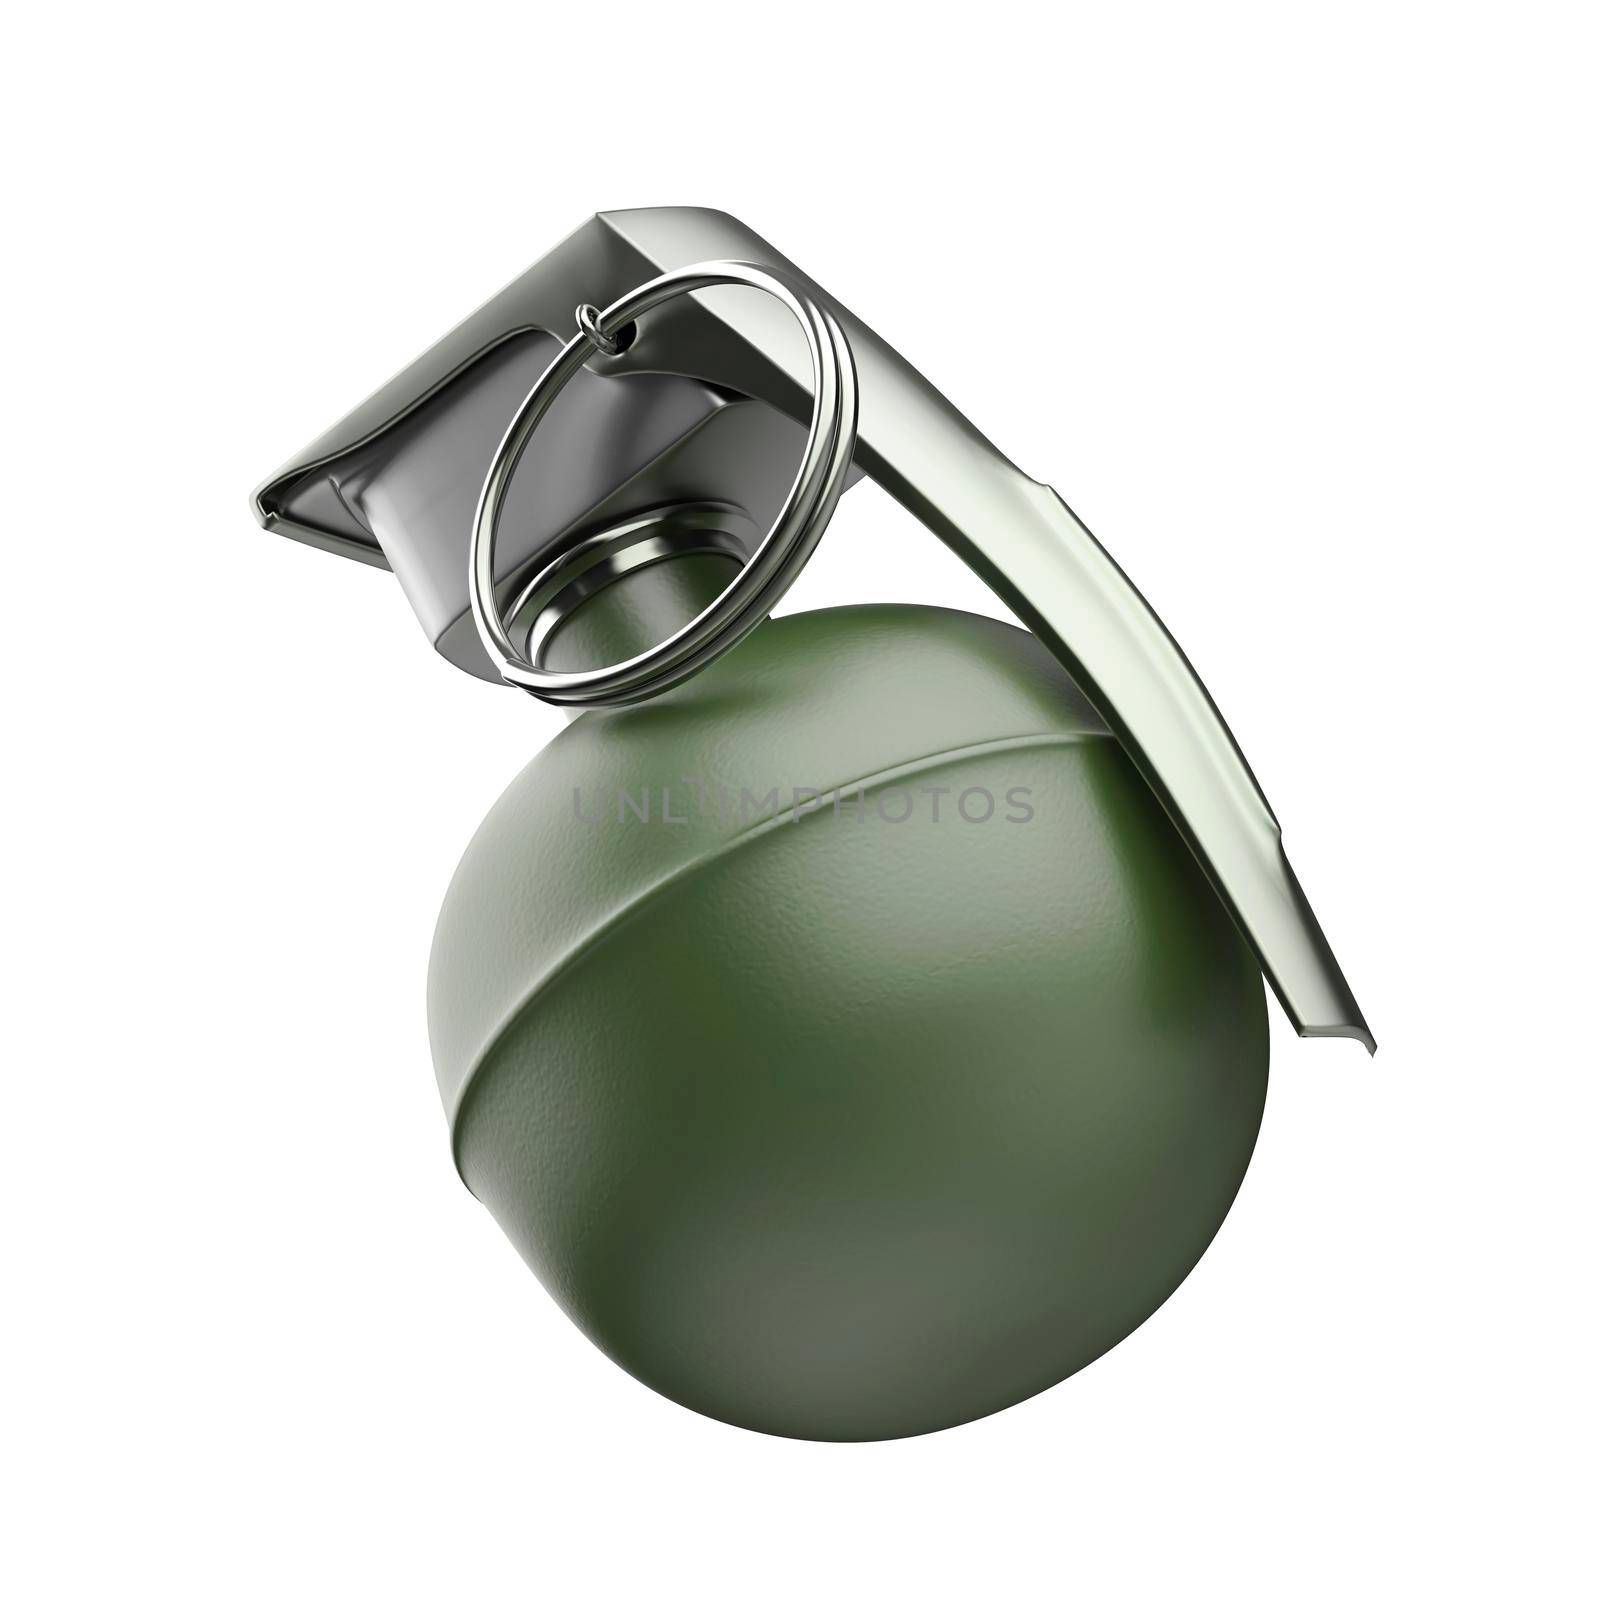 Hand grenade isolated on white background